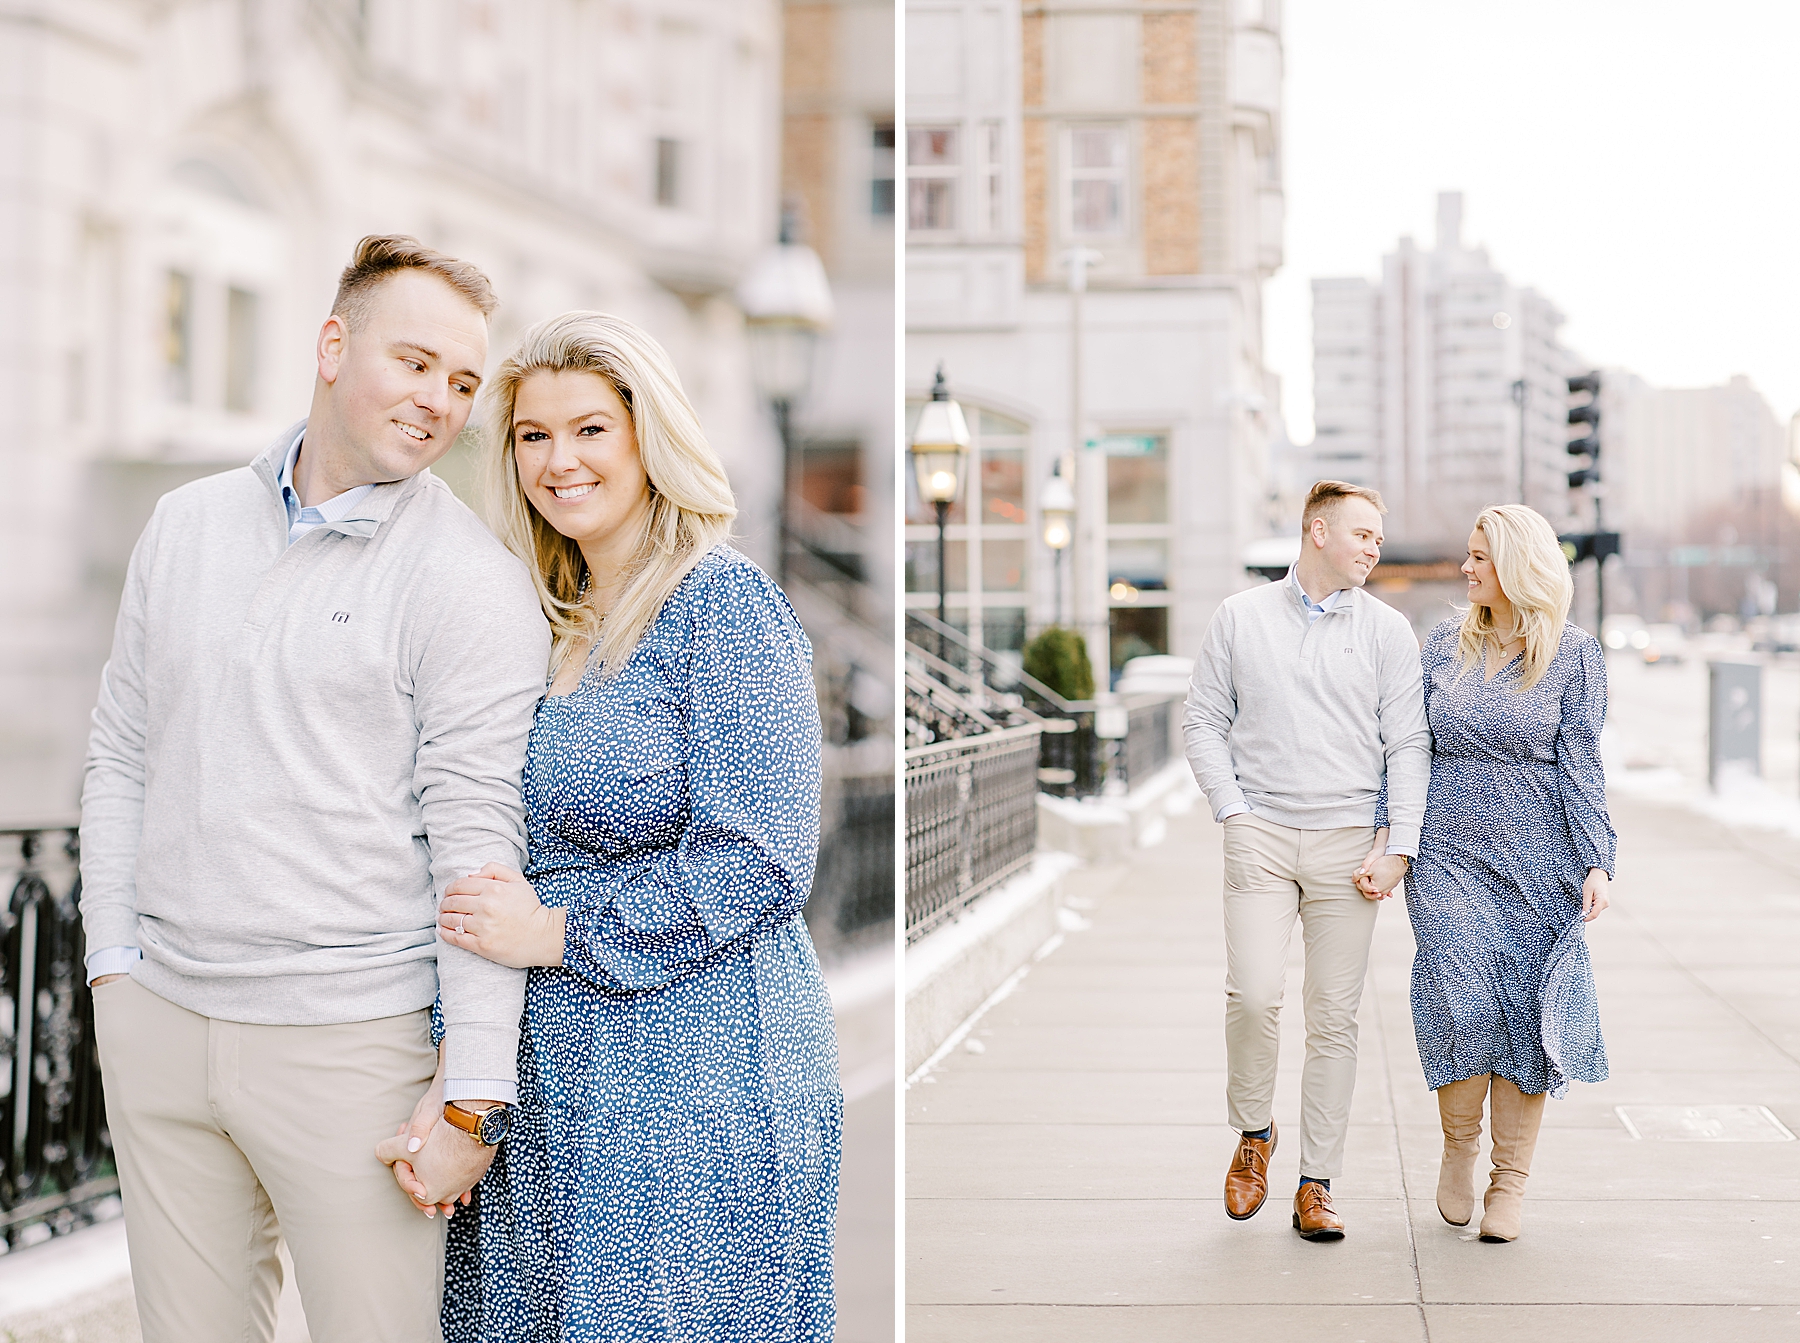 timeless engagement portraits of couple walking together in Boston South end